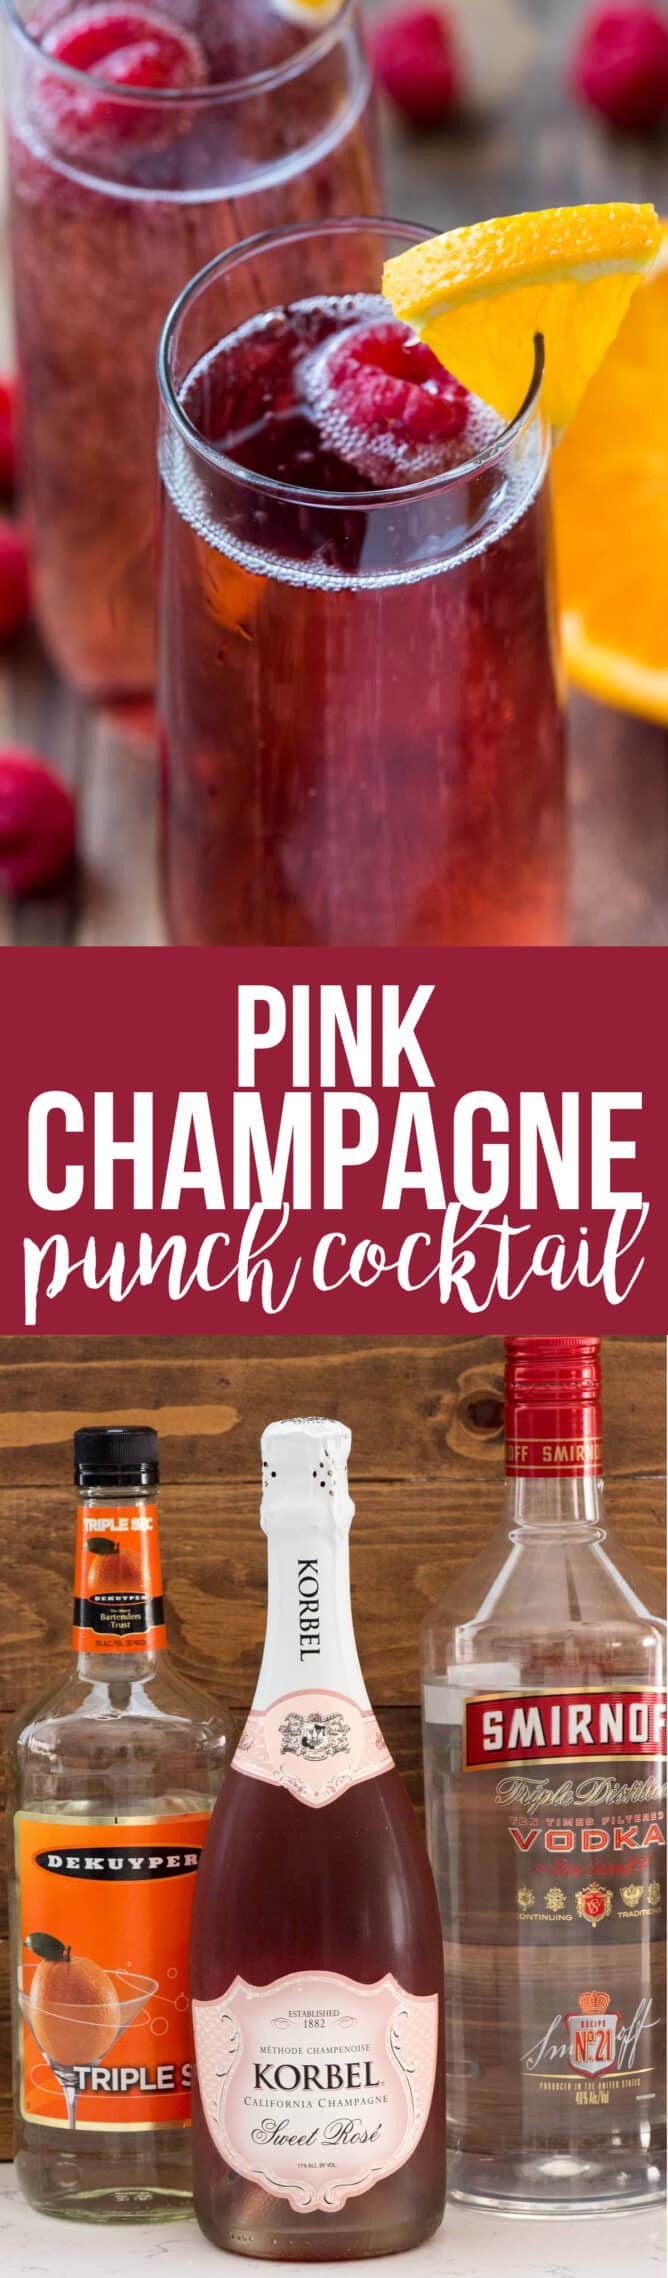 Champagne Punch Recipe - How to Make Champagne Punch